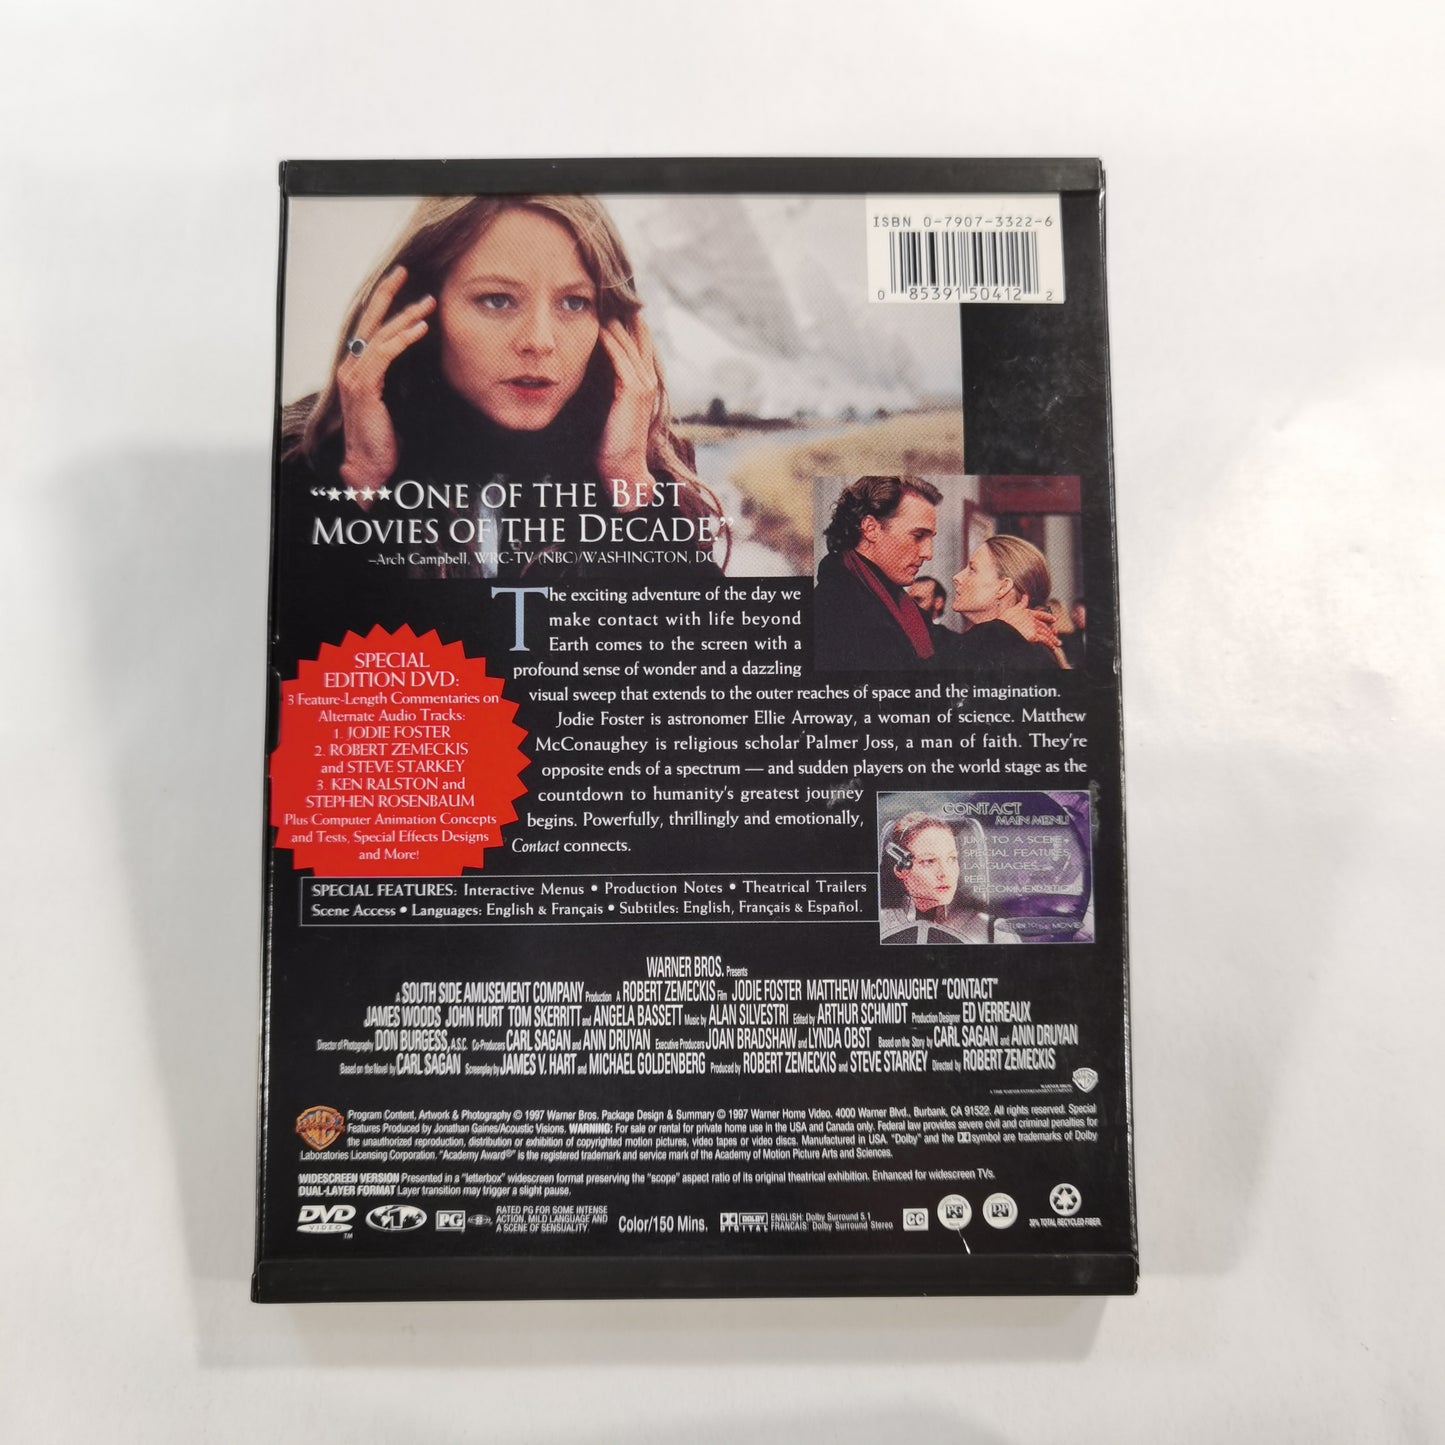 Contact (1997) - DVD US 1997 Special Edition Snap Case